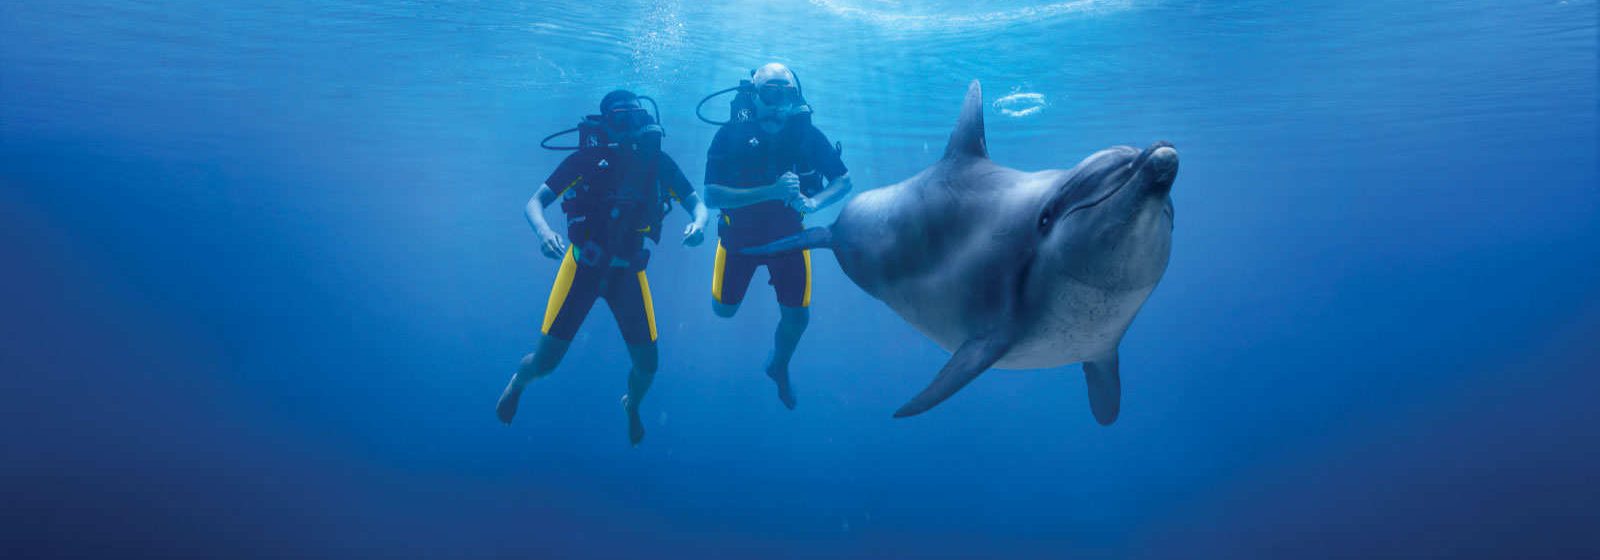 Scuba diving with dolphins